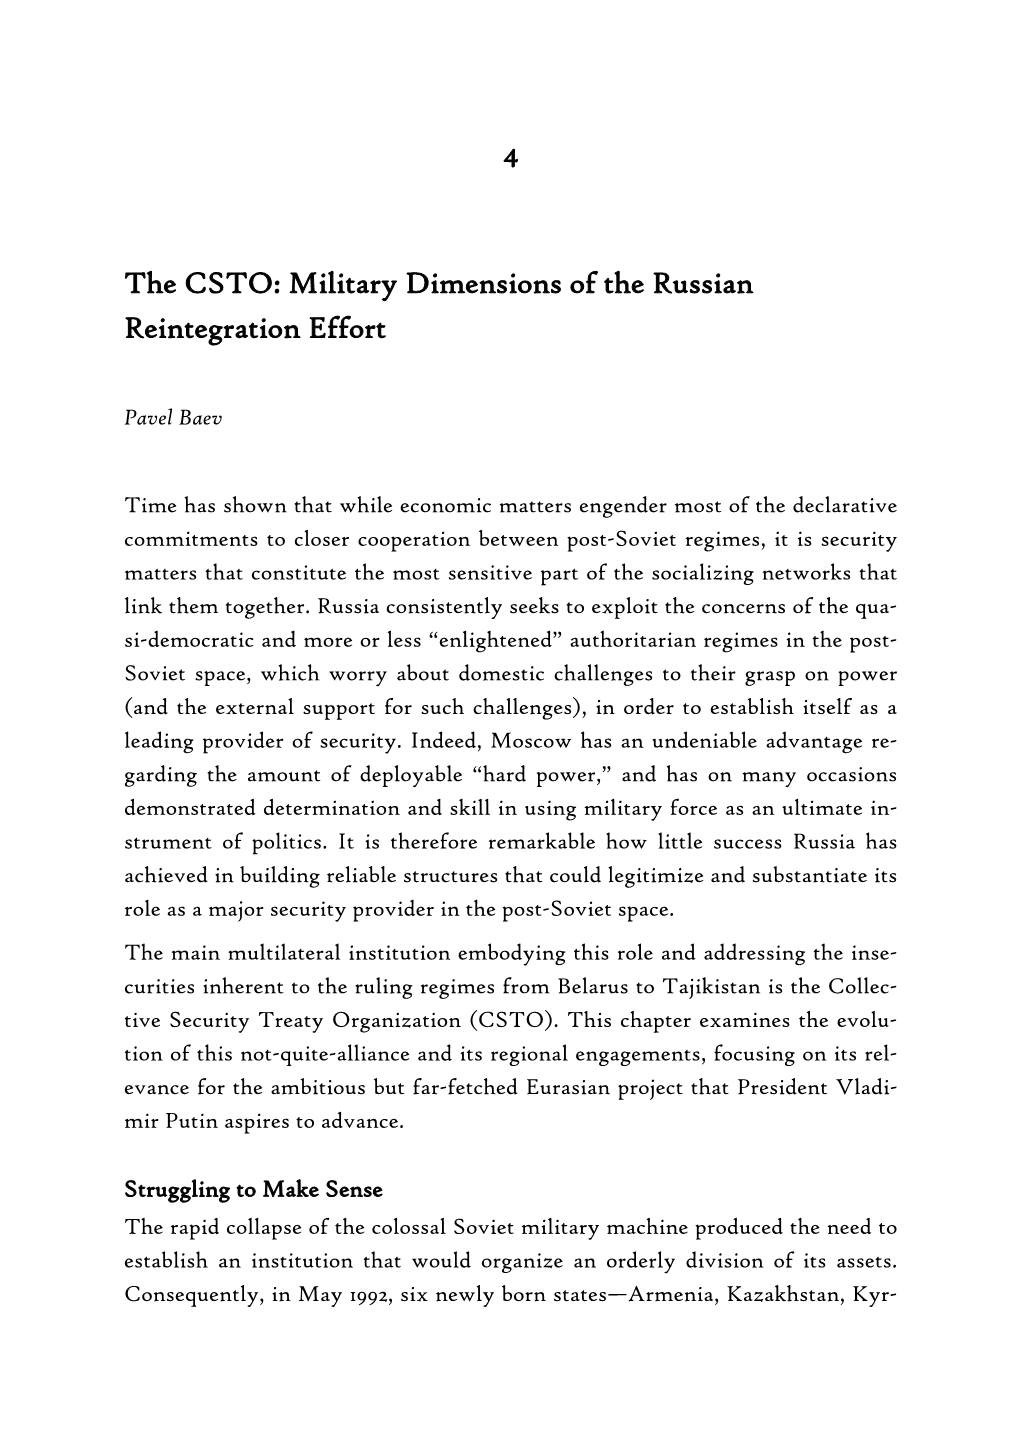 The CSTO's Role in Russian Reintegration Efforts